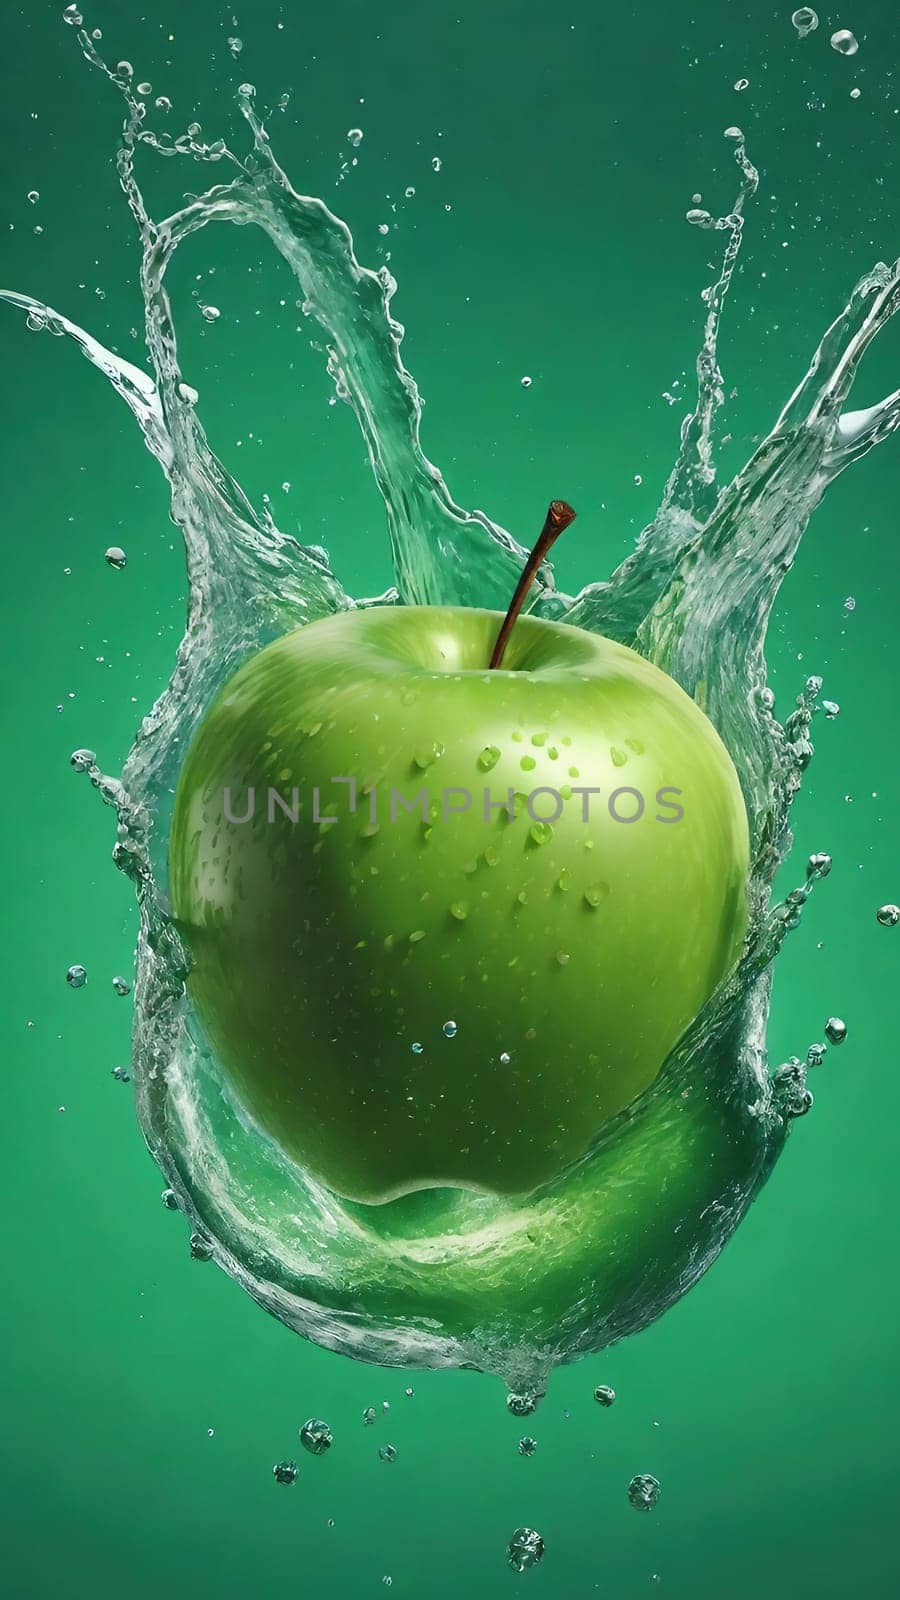 Apple falling into water with splash, isolated on background.Fresh apple with water splash on background. 3d illustration